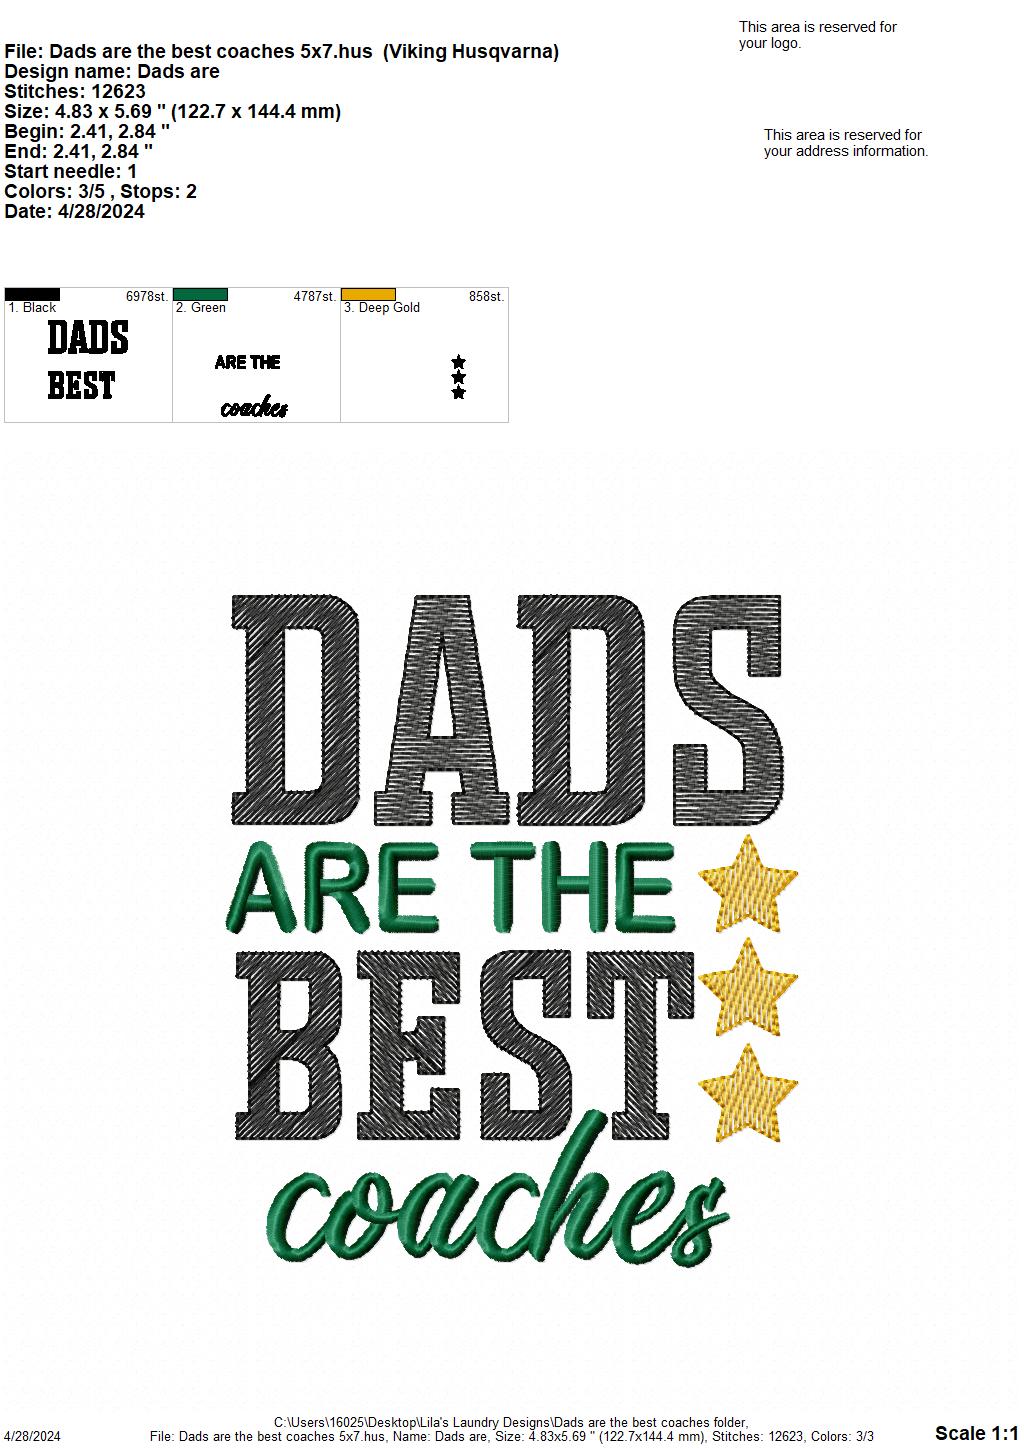 Dads are the best coaches - 4 Sizes - Digital Embroidery Design